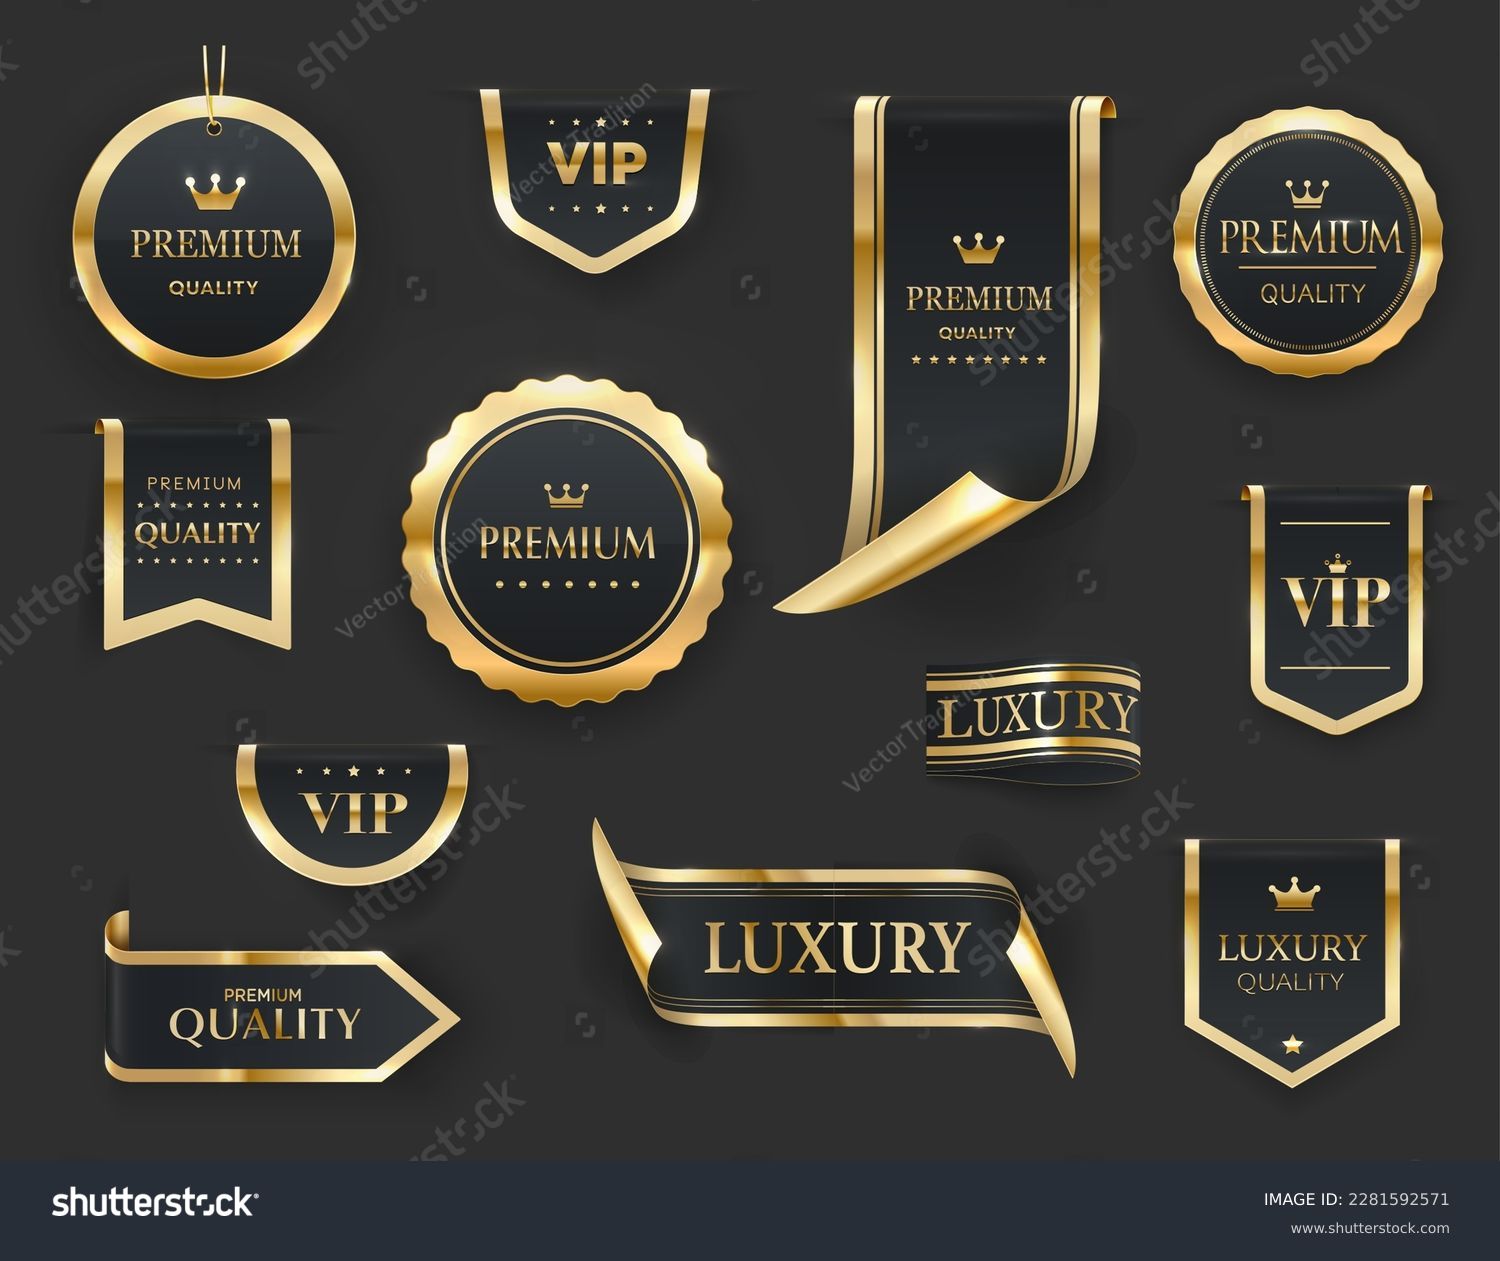 Golden luxury labels and banners, gold premium quality certificate ribbons, vector badges. Luxury VIP and premium quality sticker tags and banners for best product seals and banners with golden crown #2281592571